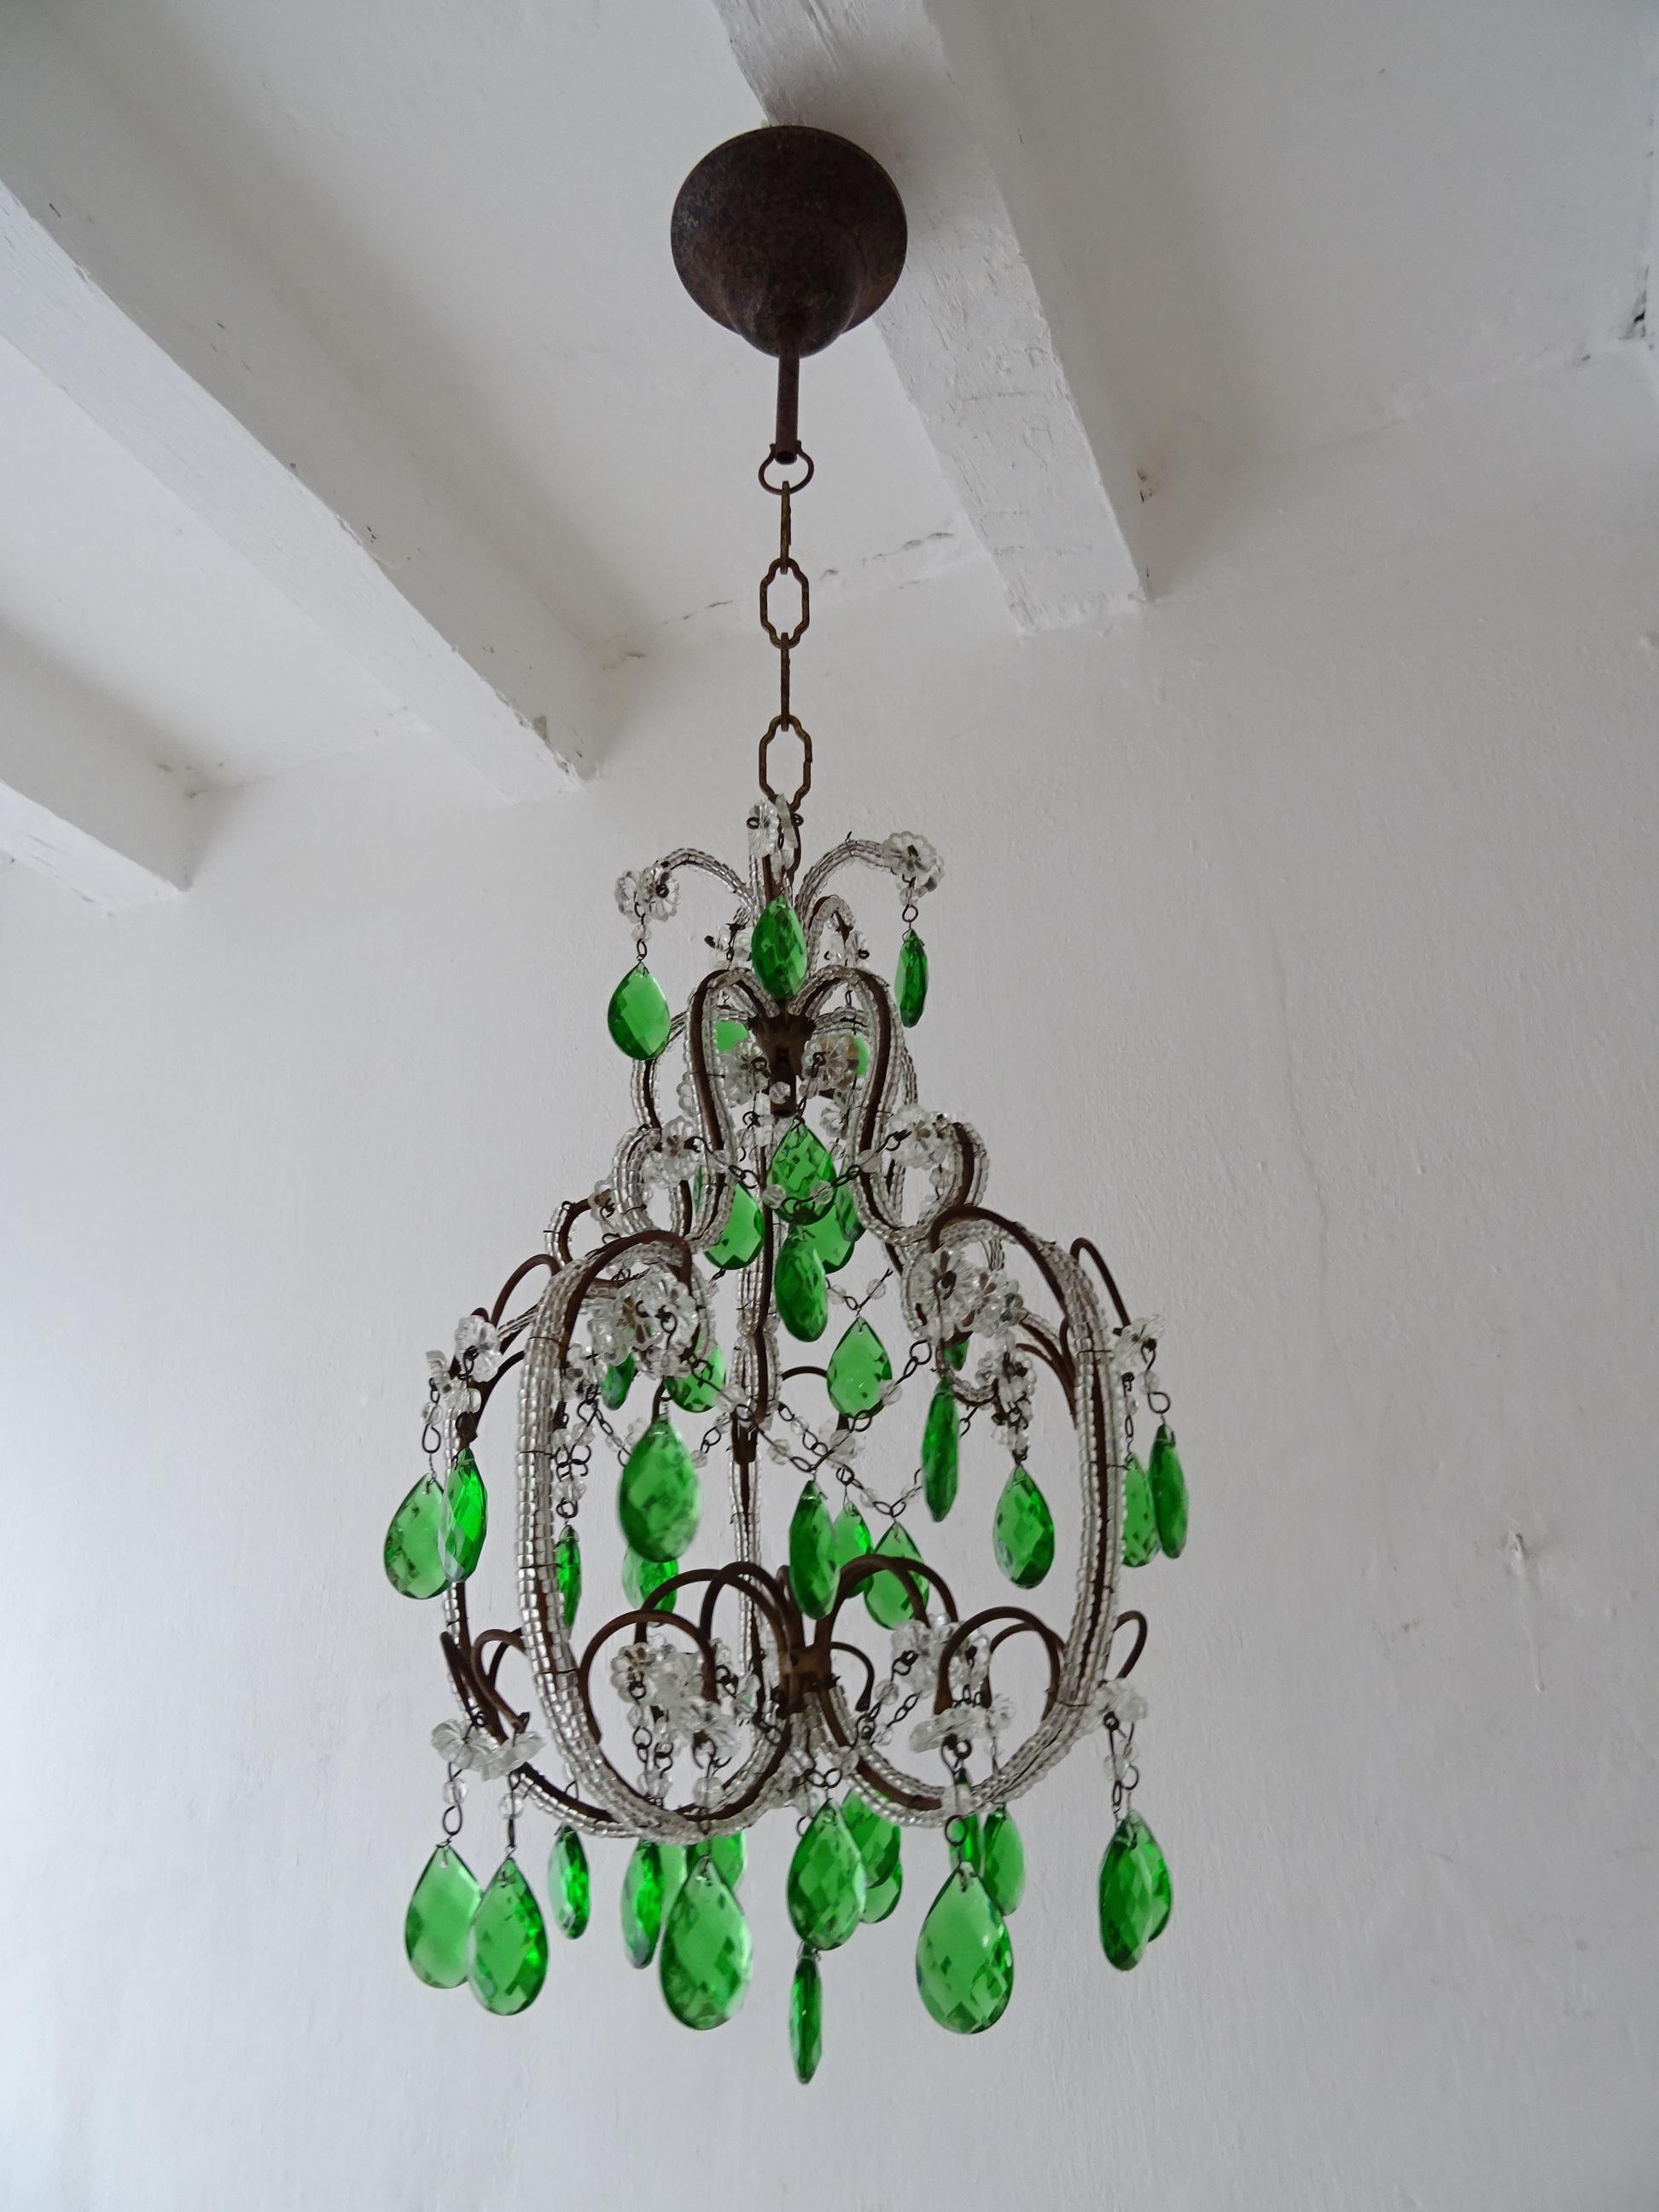 Housing one light. Will be newly wired with a certified US UL socket for the USA or appropriate socket for all other countries and ready to hang. Rare emerald green crystal prisms. Beaded throughout with florets. Adding another 12 inches of original